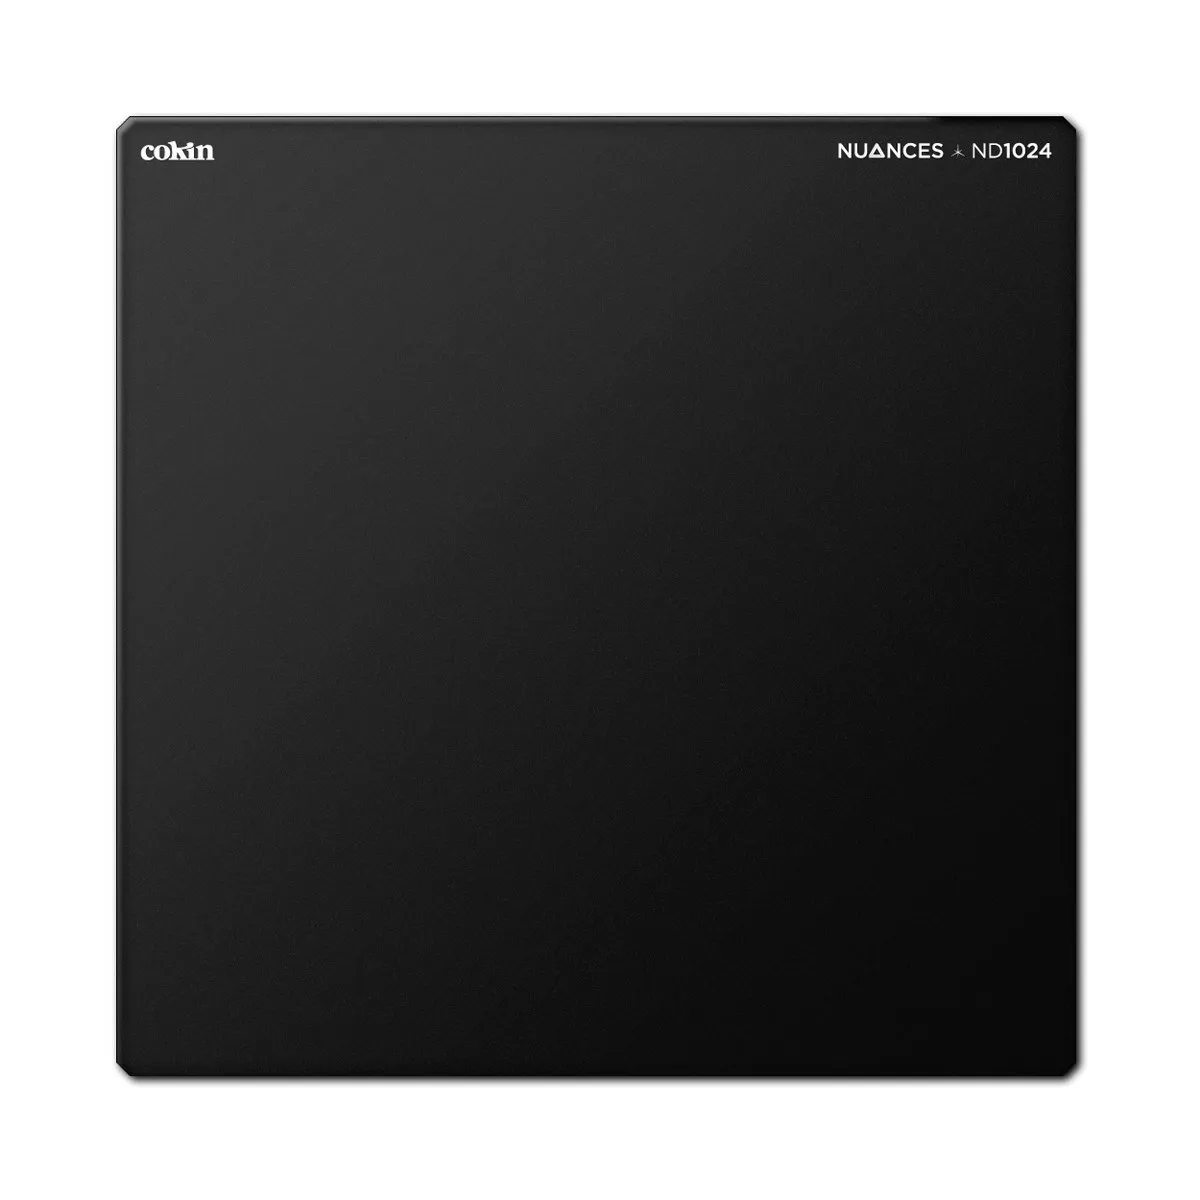 Cokin Nuances ND1024 - 10-Stop Filter